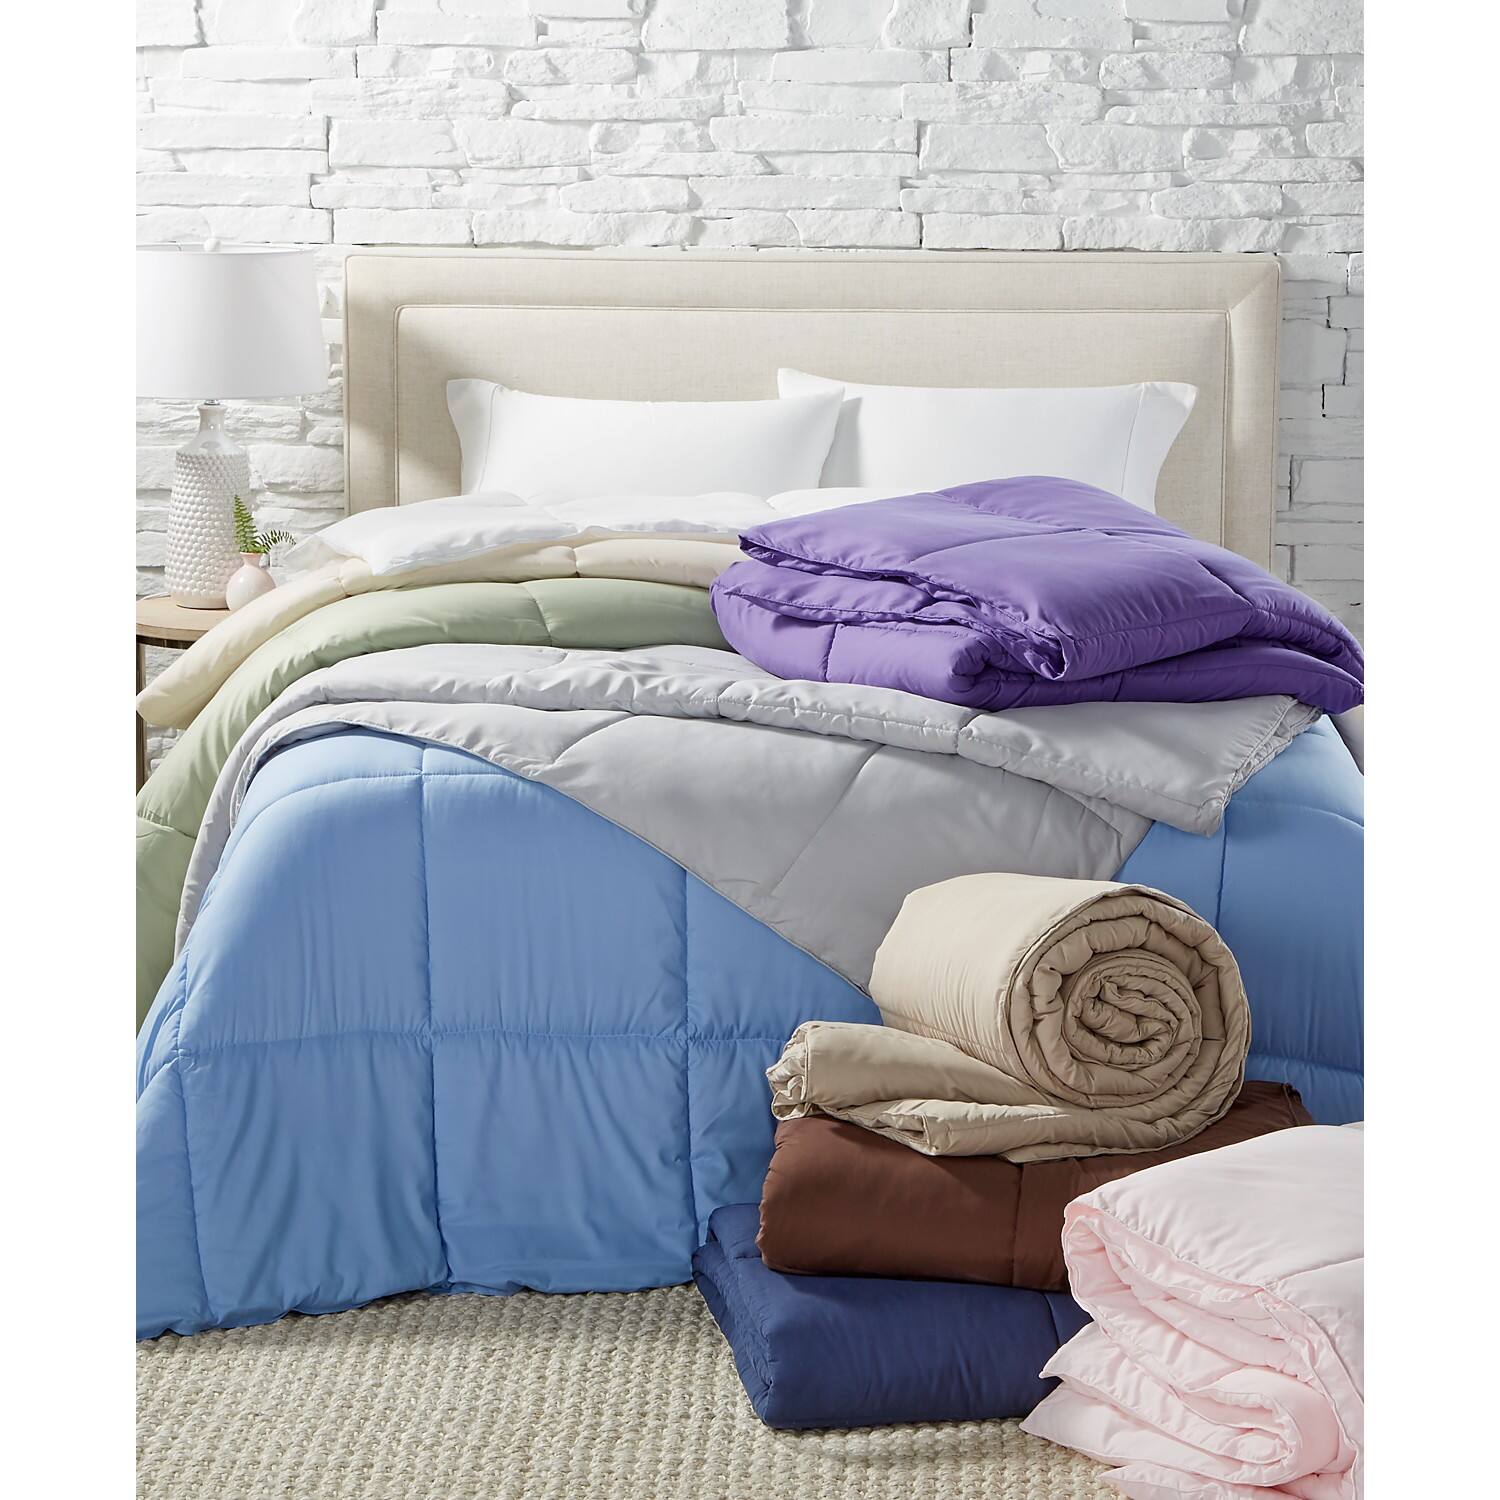 Royal Luxe Lightweight Microfiber Color Down Alternative Comforter (King, Full/Queen, Twin, Various Colors) $20 + Free Store Pickup at Macy's or FS on $25+